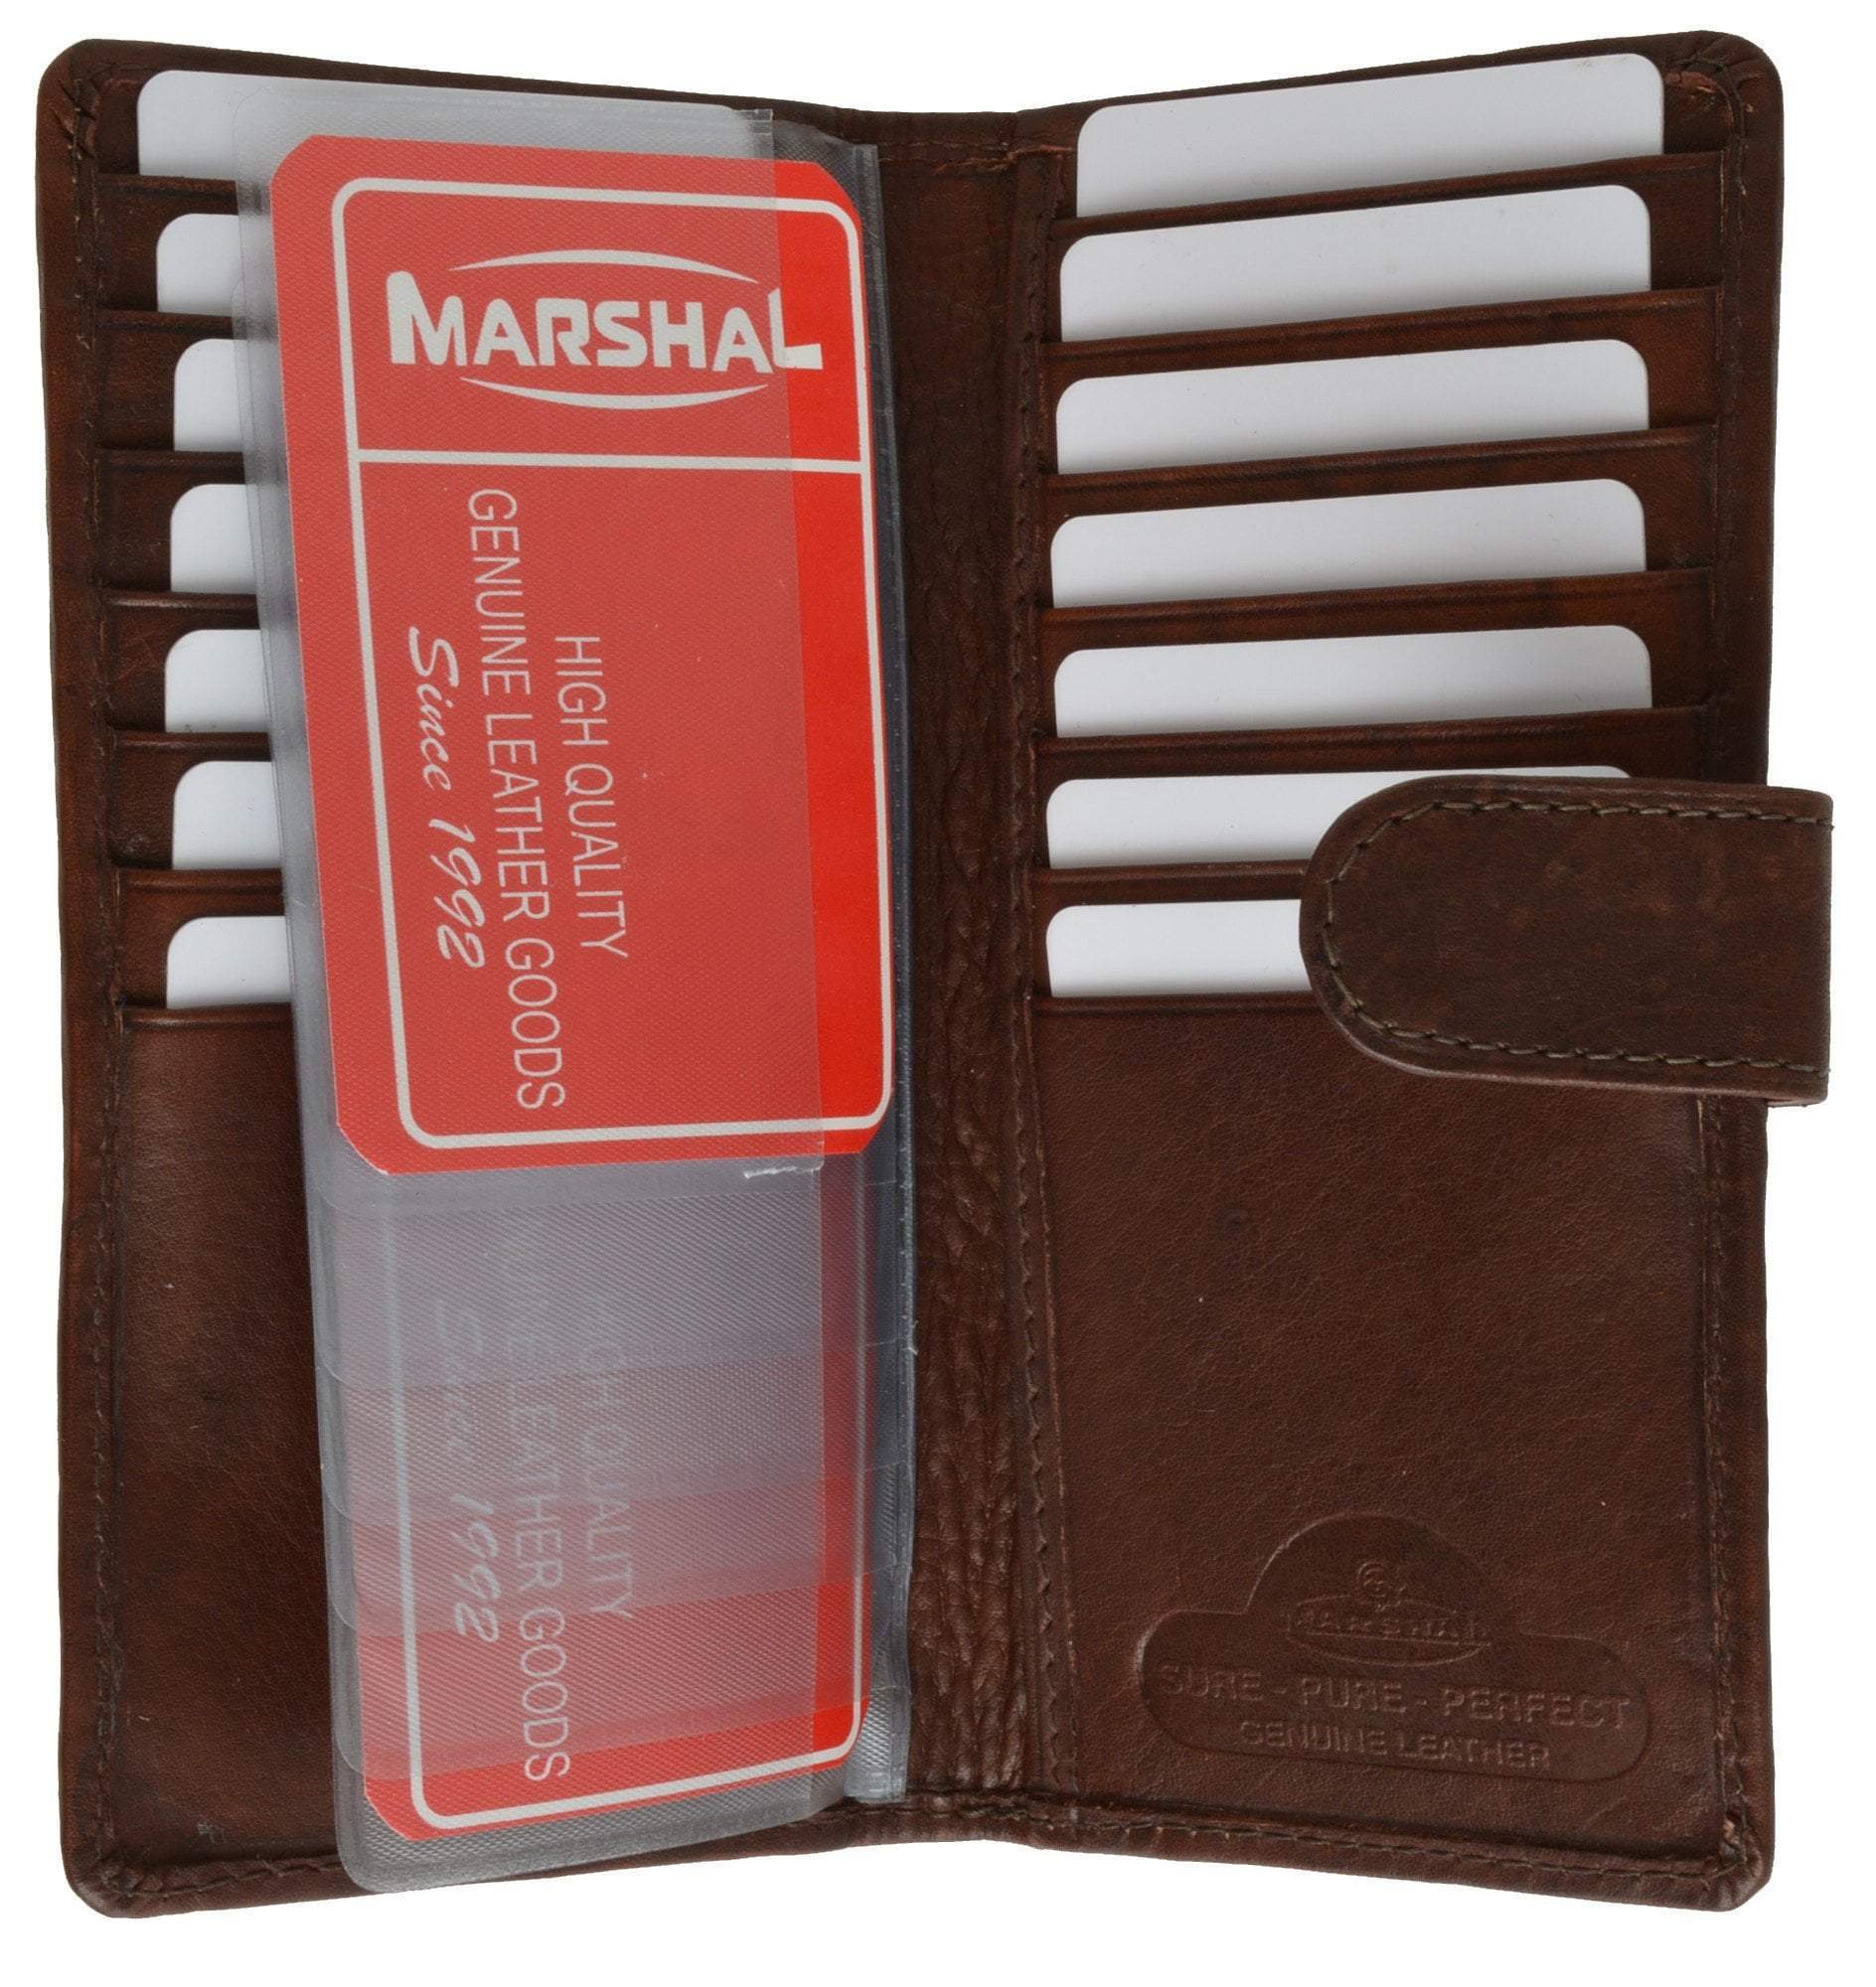 leather checkbook covers with credit card slots